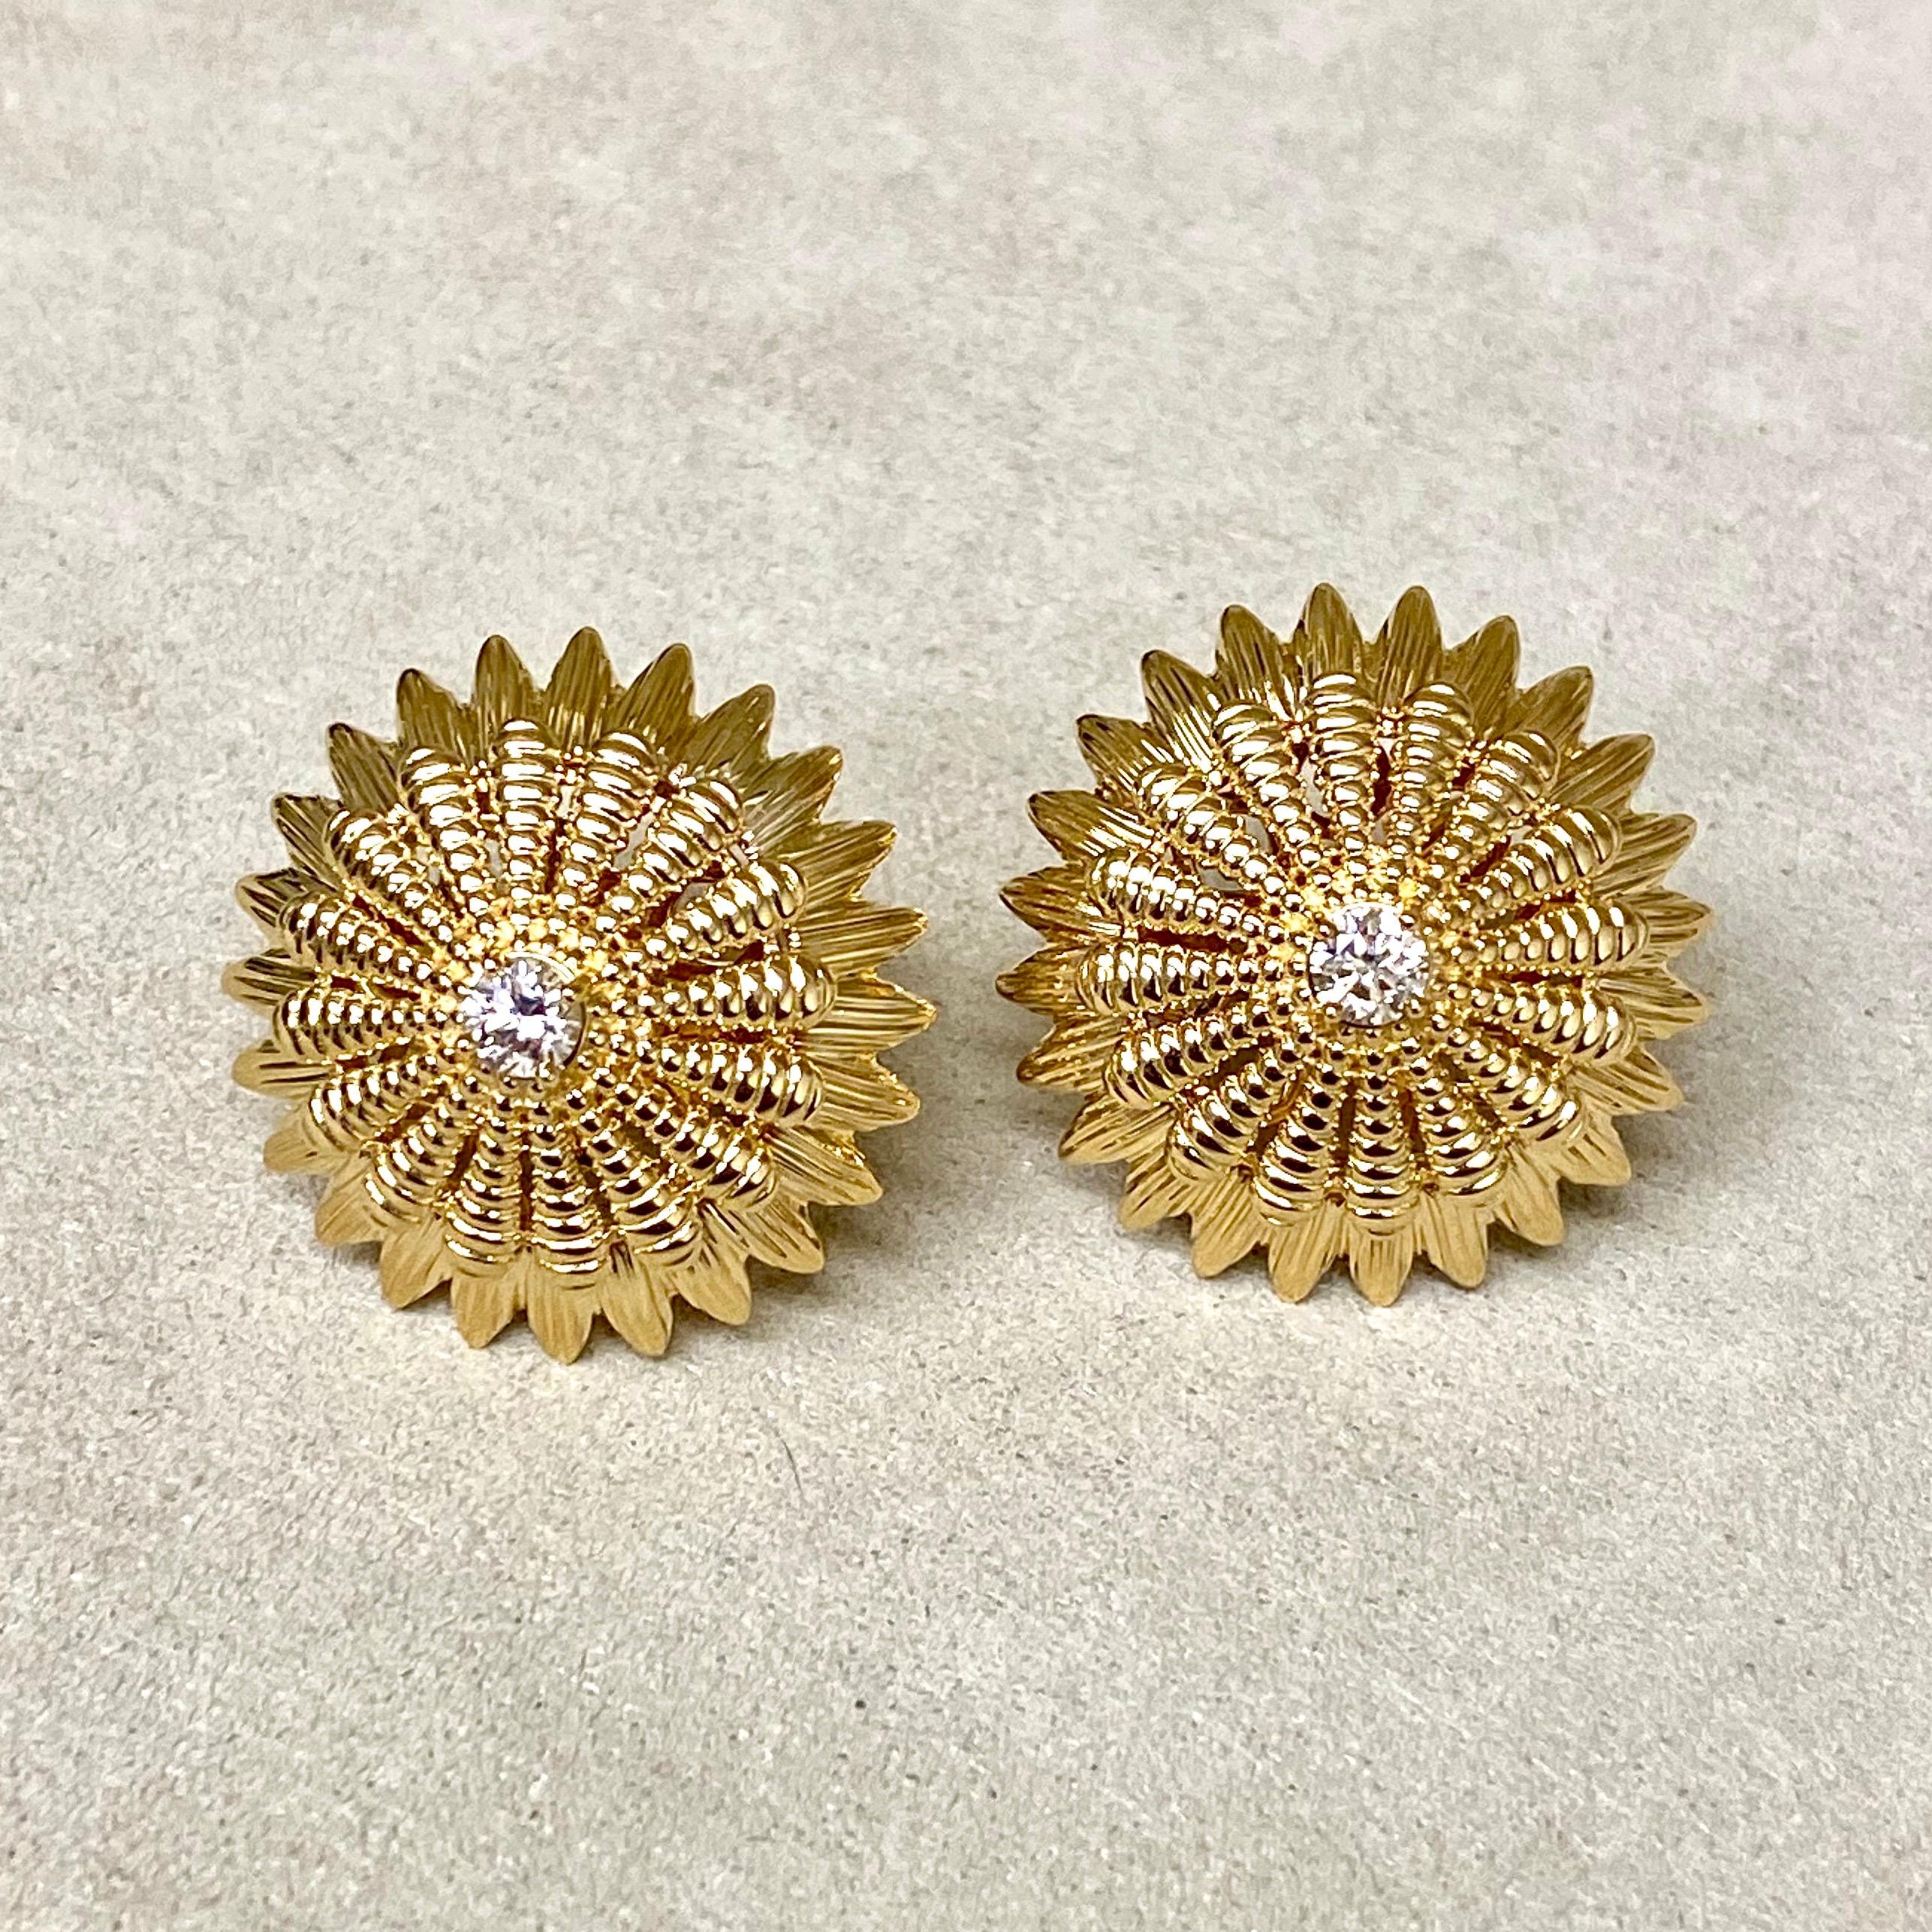 Created in 18 karat yellow gold
Diamonds 0.30 ct approx
Omega backs
Limited edition

Transcend everyday elegance with our limited edition Candy Blue Topaz and Moon Quartz earrings, crafted from 18 karat yellow gold and set with shimmering diamonds